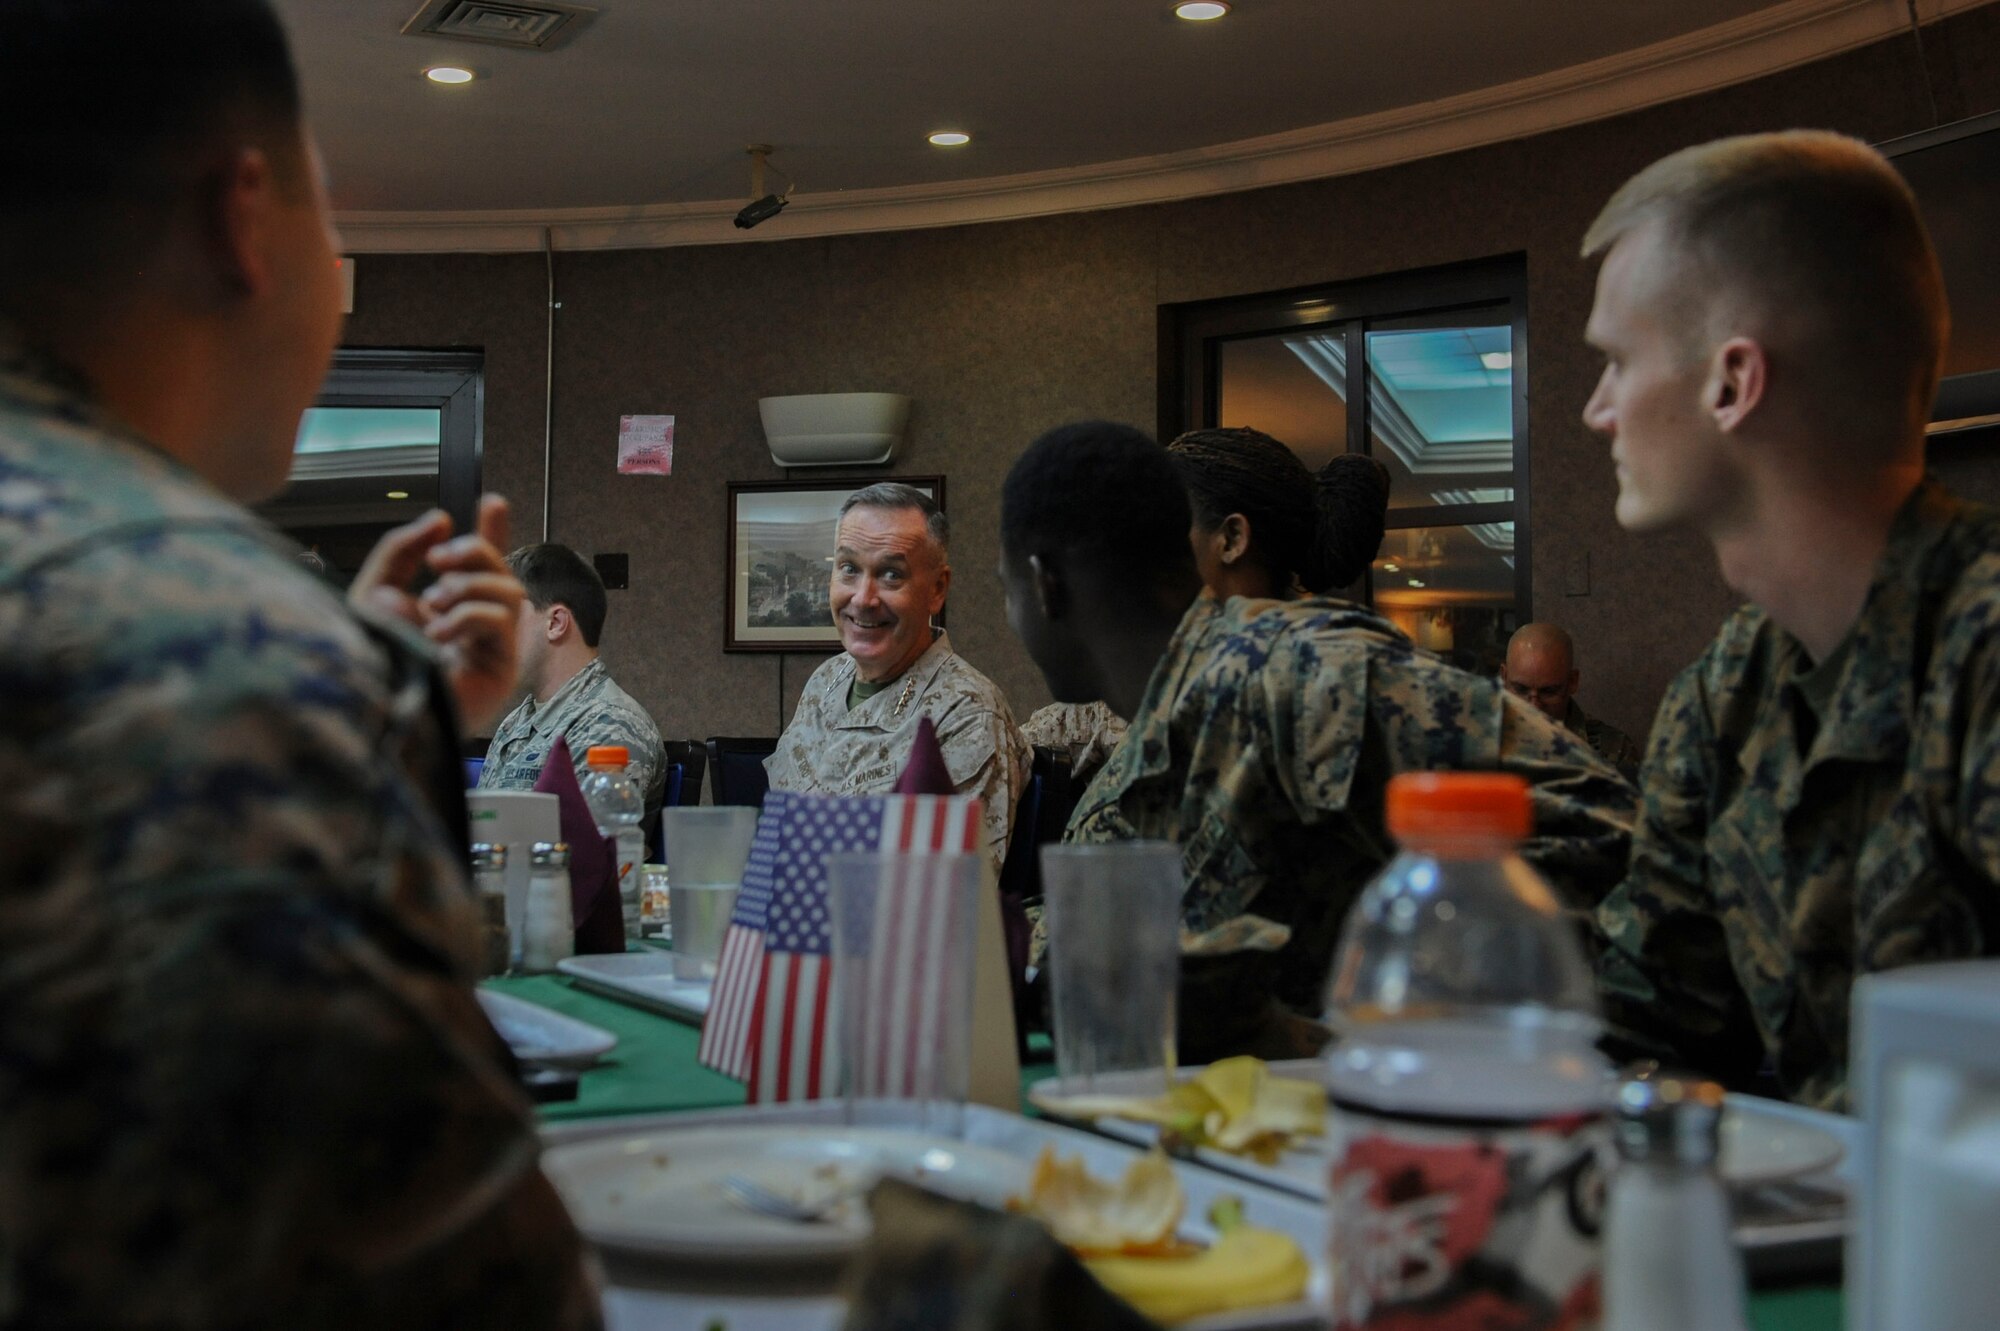 U.S. Marine Corps Gen. Joseph F. Dunford, Jr., chairman of the Joint Chiefs of Staff (CJCS), eats dinner with service members Dec. 5, 2016 at Incirlik Air Base, Turkey. Dunford is the 19th CJCS, the nation’s highest-ranking military officer, and the principal military advisor to the President, Secretary of Defense, and National Security Council. (U.S. Air Force photo by Airman 1st Class Devin M. Rumbaugh)